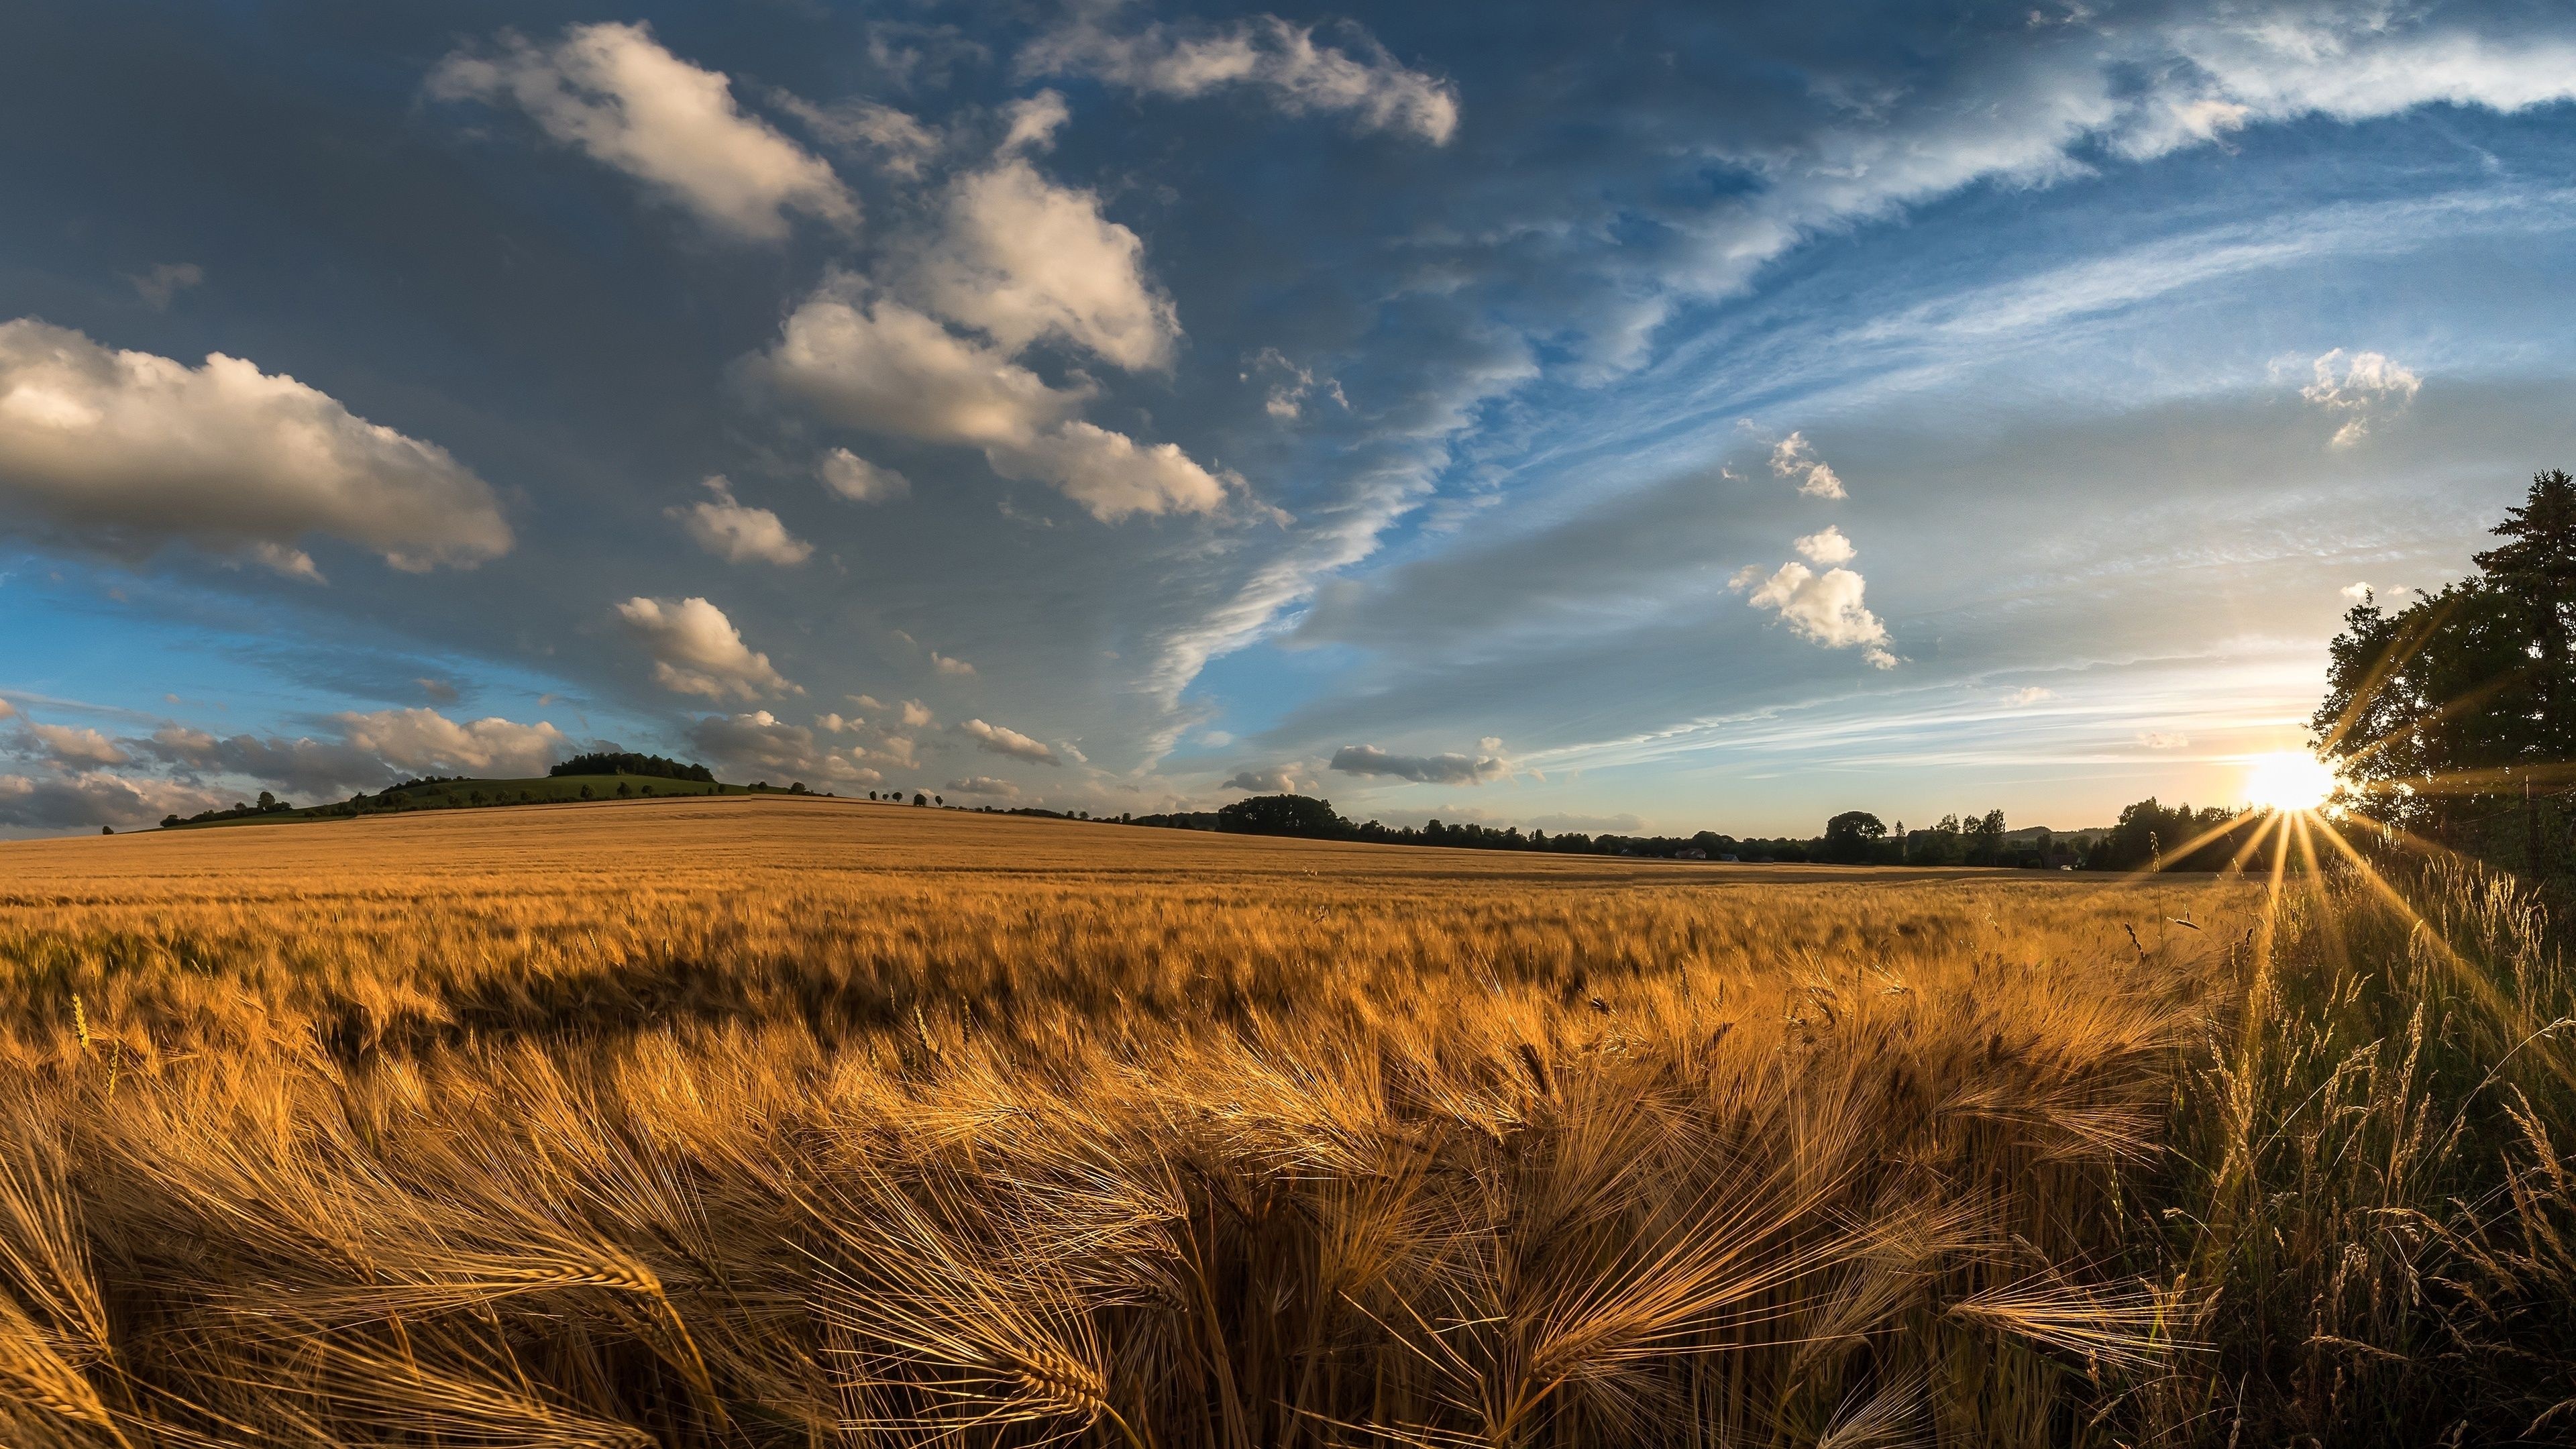 Farm: Agriculture, Grain field, Growing crops. 3840x2160 4K Background.